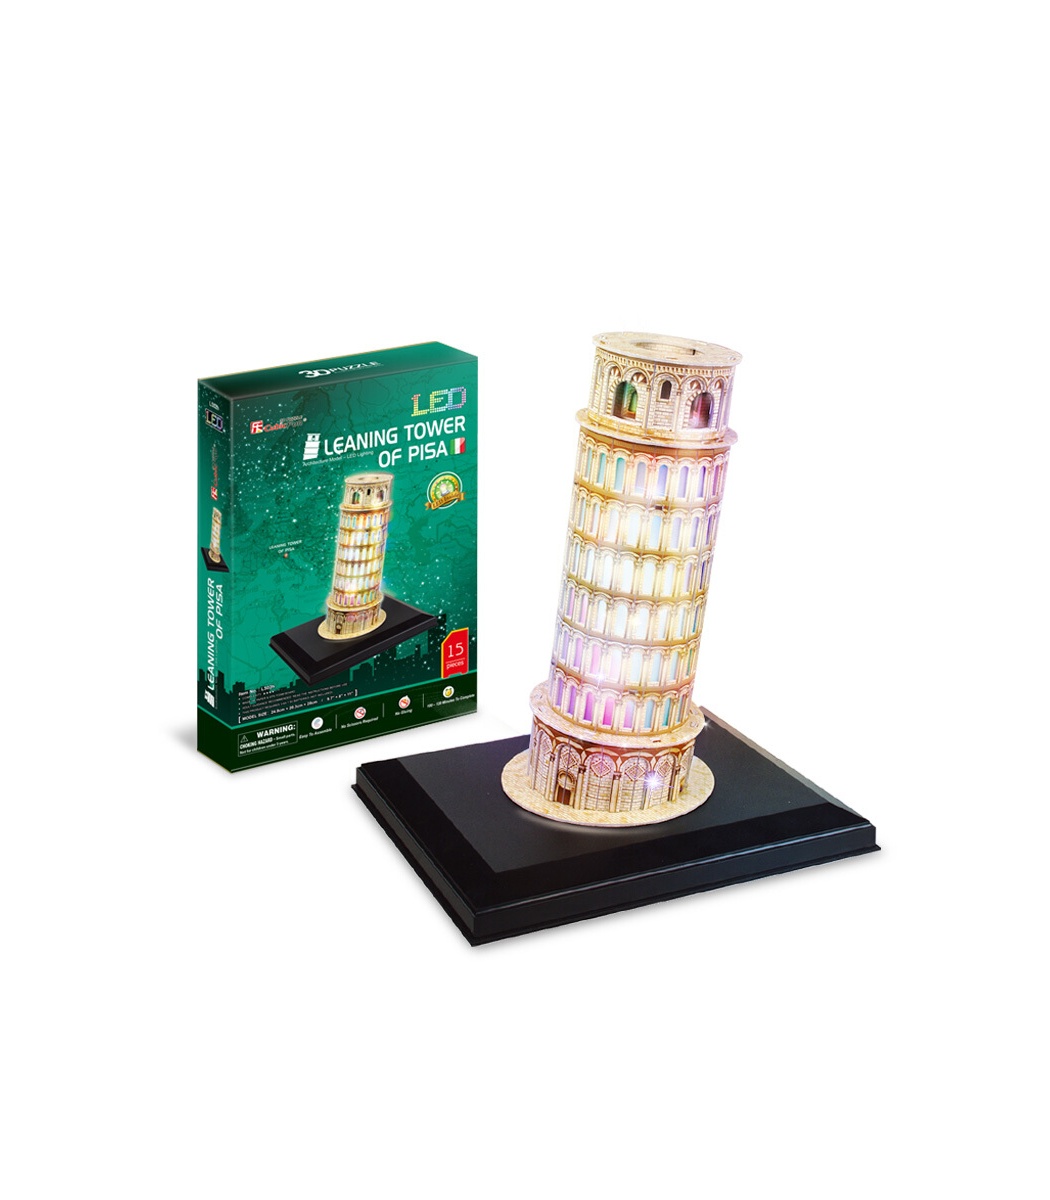 3d puzzle tower of pisa with led CUBICFUN 15 piece Educational a0102